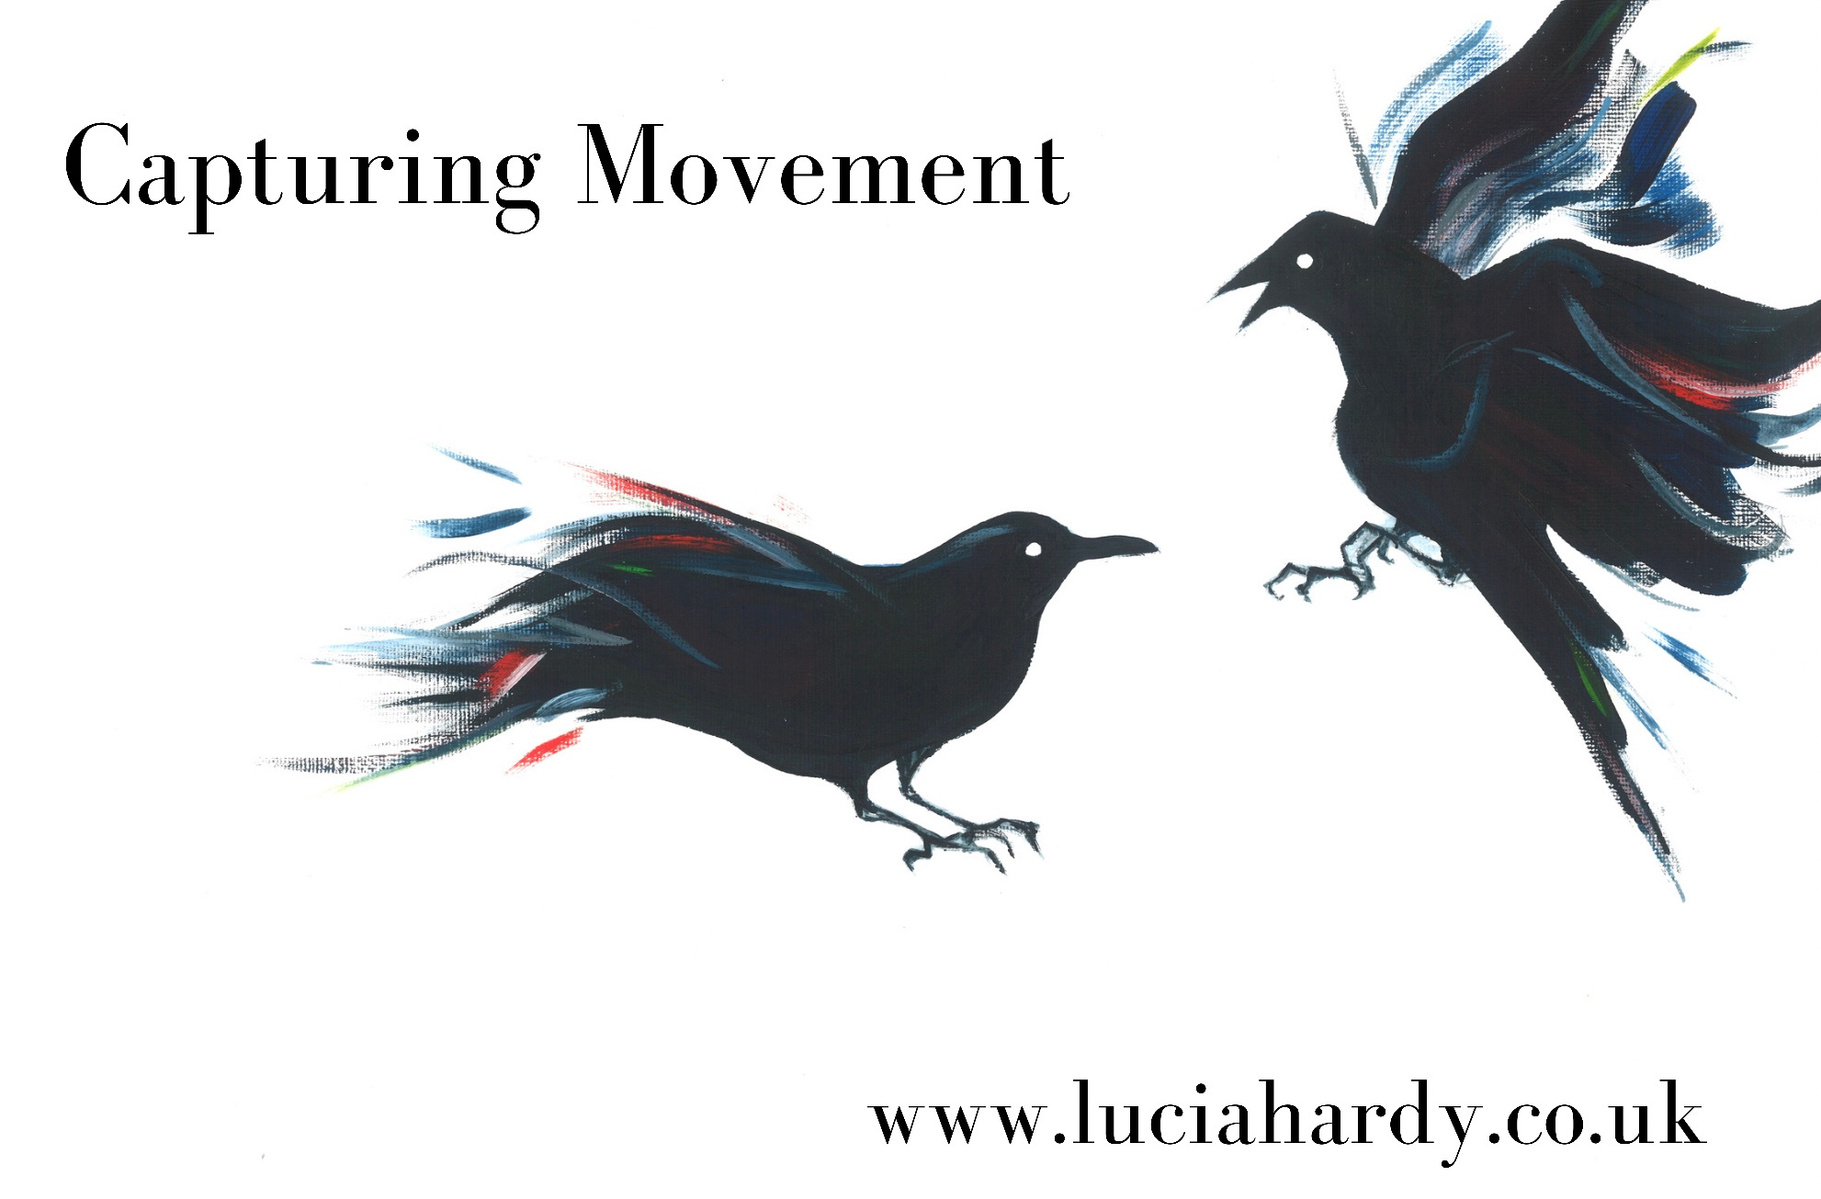 Artwork of two fighting crows with feathers flying.  Titles are capturing movement, and www.luciahardy.co.uk